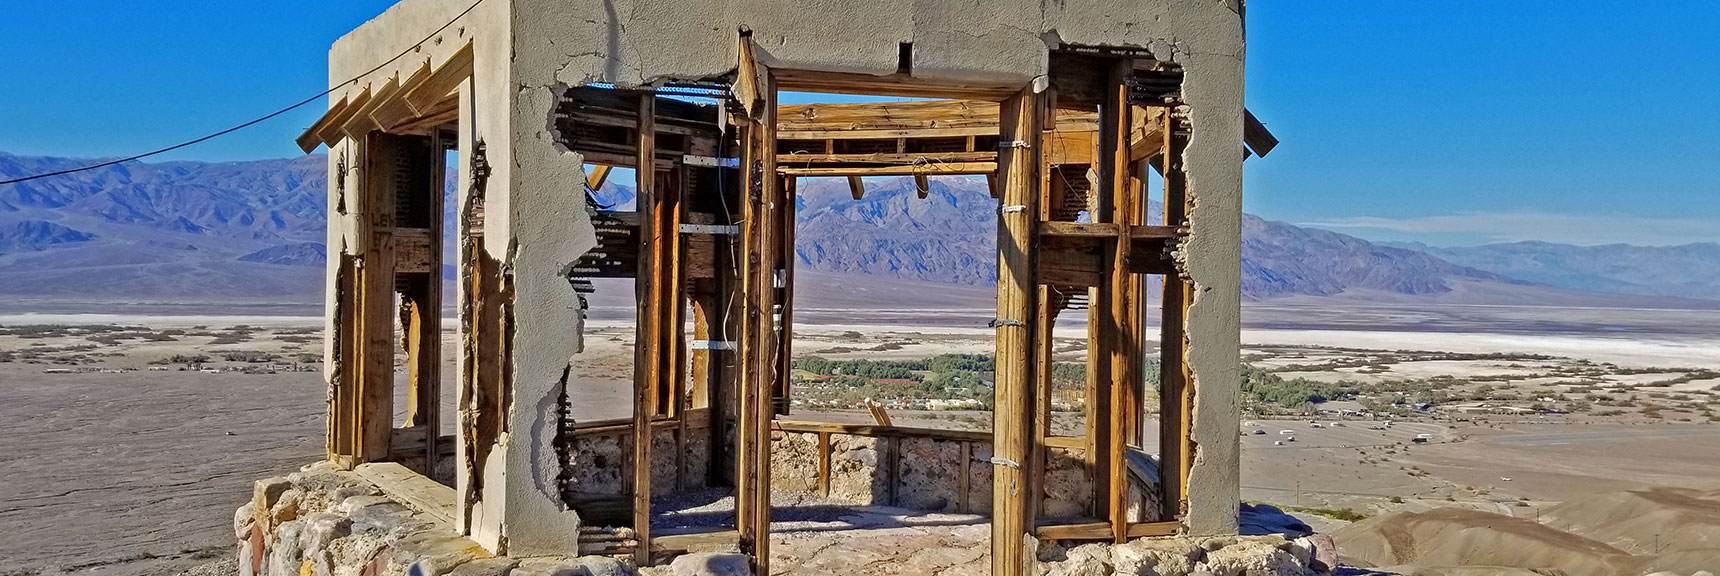 What's Left of the Tea House Front Entrance | Tea House & Table Rock Circuit | Furnace Creek | Death Valley National Park, California